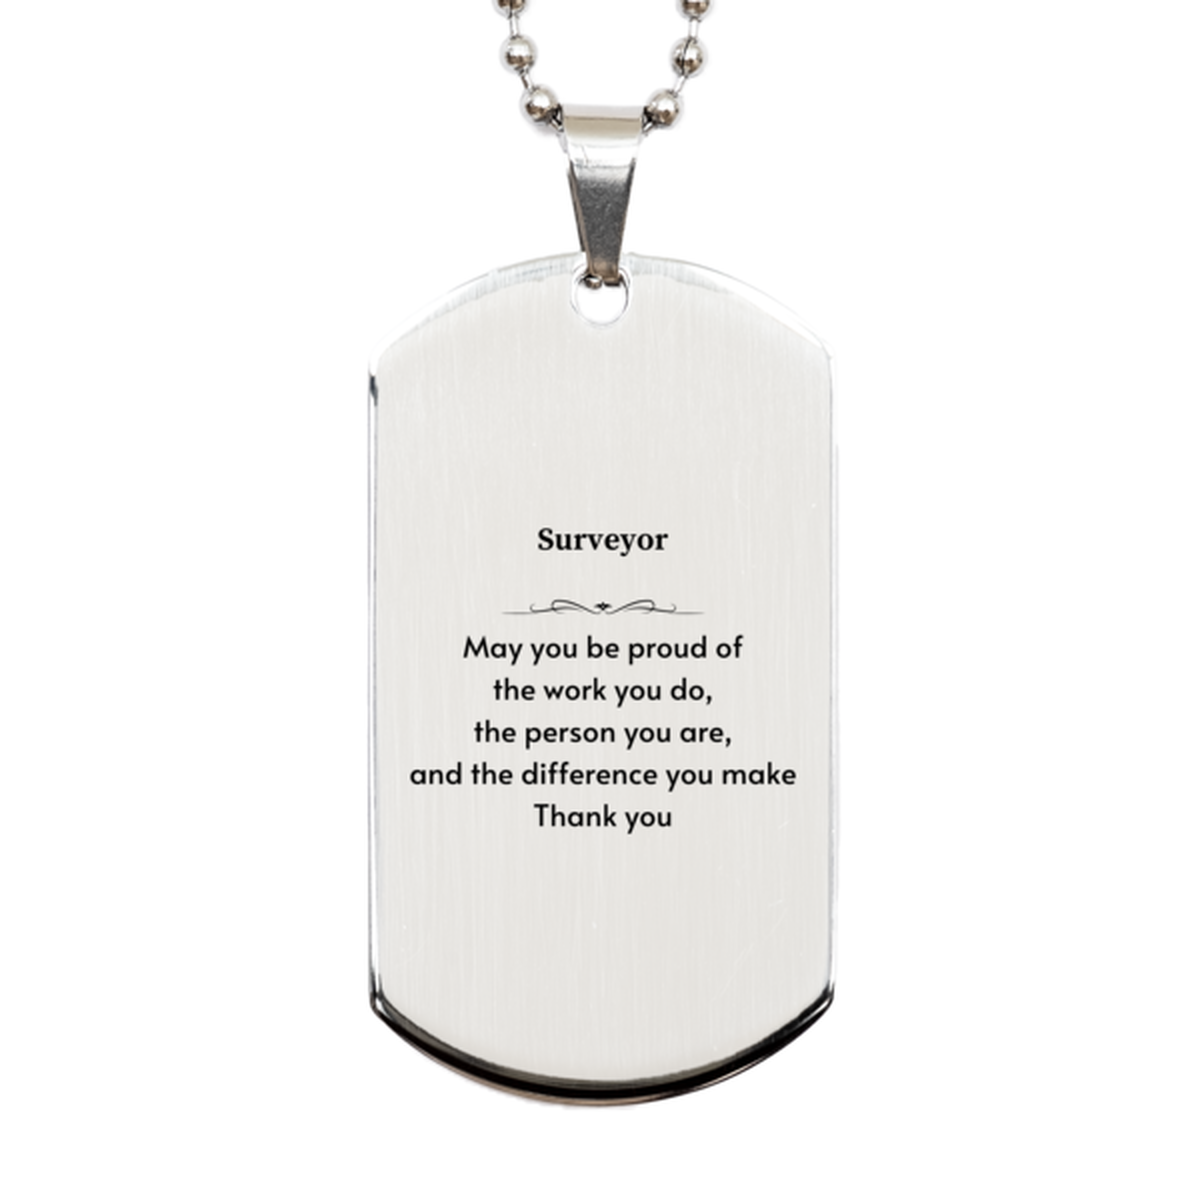 Heartwarming Silver Dog Tag Retirement Coworkers Gifts for Surveyor, Surveyor May You be proud of the work you do, the person you are Gifts for Boss Men Women Friends